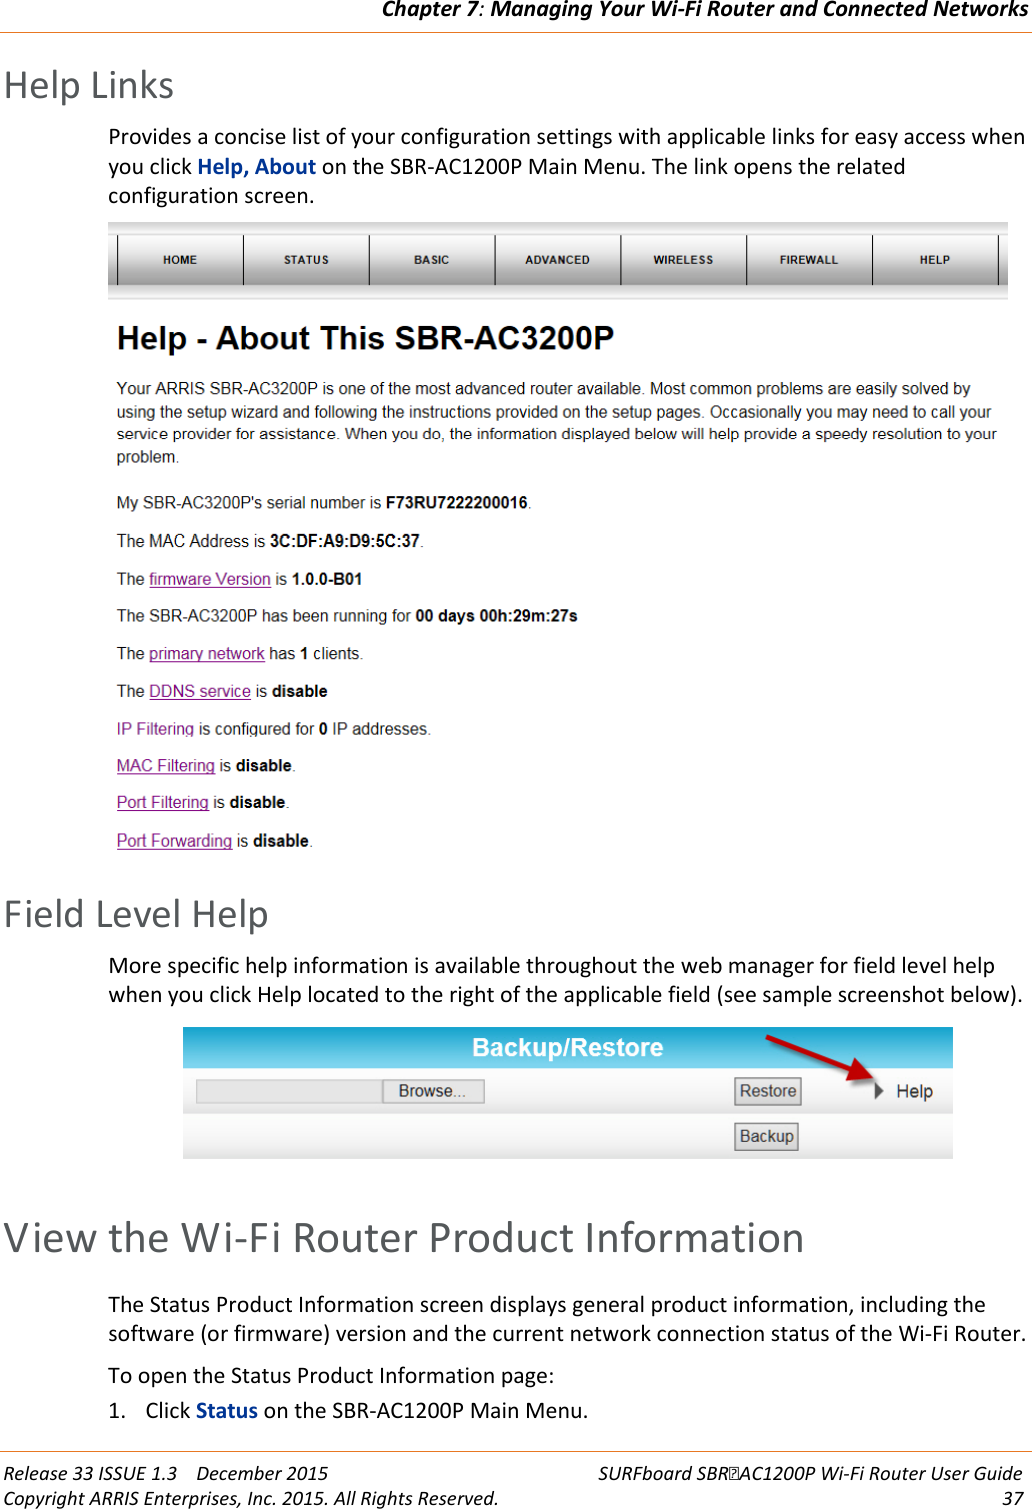 Chapter 7: Managing Your Wi-Fi Router and Connected Networks  Release 33 ISSUE 1.3    December 2015 SURFboard SBRAC1200P Wi-Fi Router User Guide Copyright ARRIS Enterprises, Inc. 2015. All Rights Reserved. 37  Help Links Provides a concise list of your configuration settings with applicable links for easy access when you click Help, About on the SBR-AC1200P Main Menu. The link opens the related configuration screen.    Field Level Help More specific help information is available throughout the web manager for field level help when you click Help located to the right of the applicable field (see sample screenshot below).    View the Wi-Fi Router Product Information The Status Product Information screen displays general product information, including the software (or firmware) version and the current network connection status of the Wi-Fi Router. To open the Status Product Information page: 1. Click Status on the SBR-AC1200P Main Menu. 